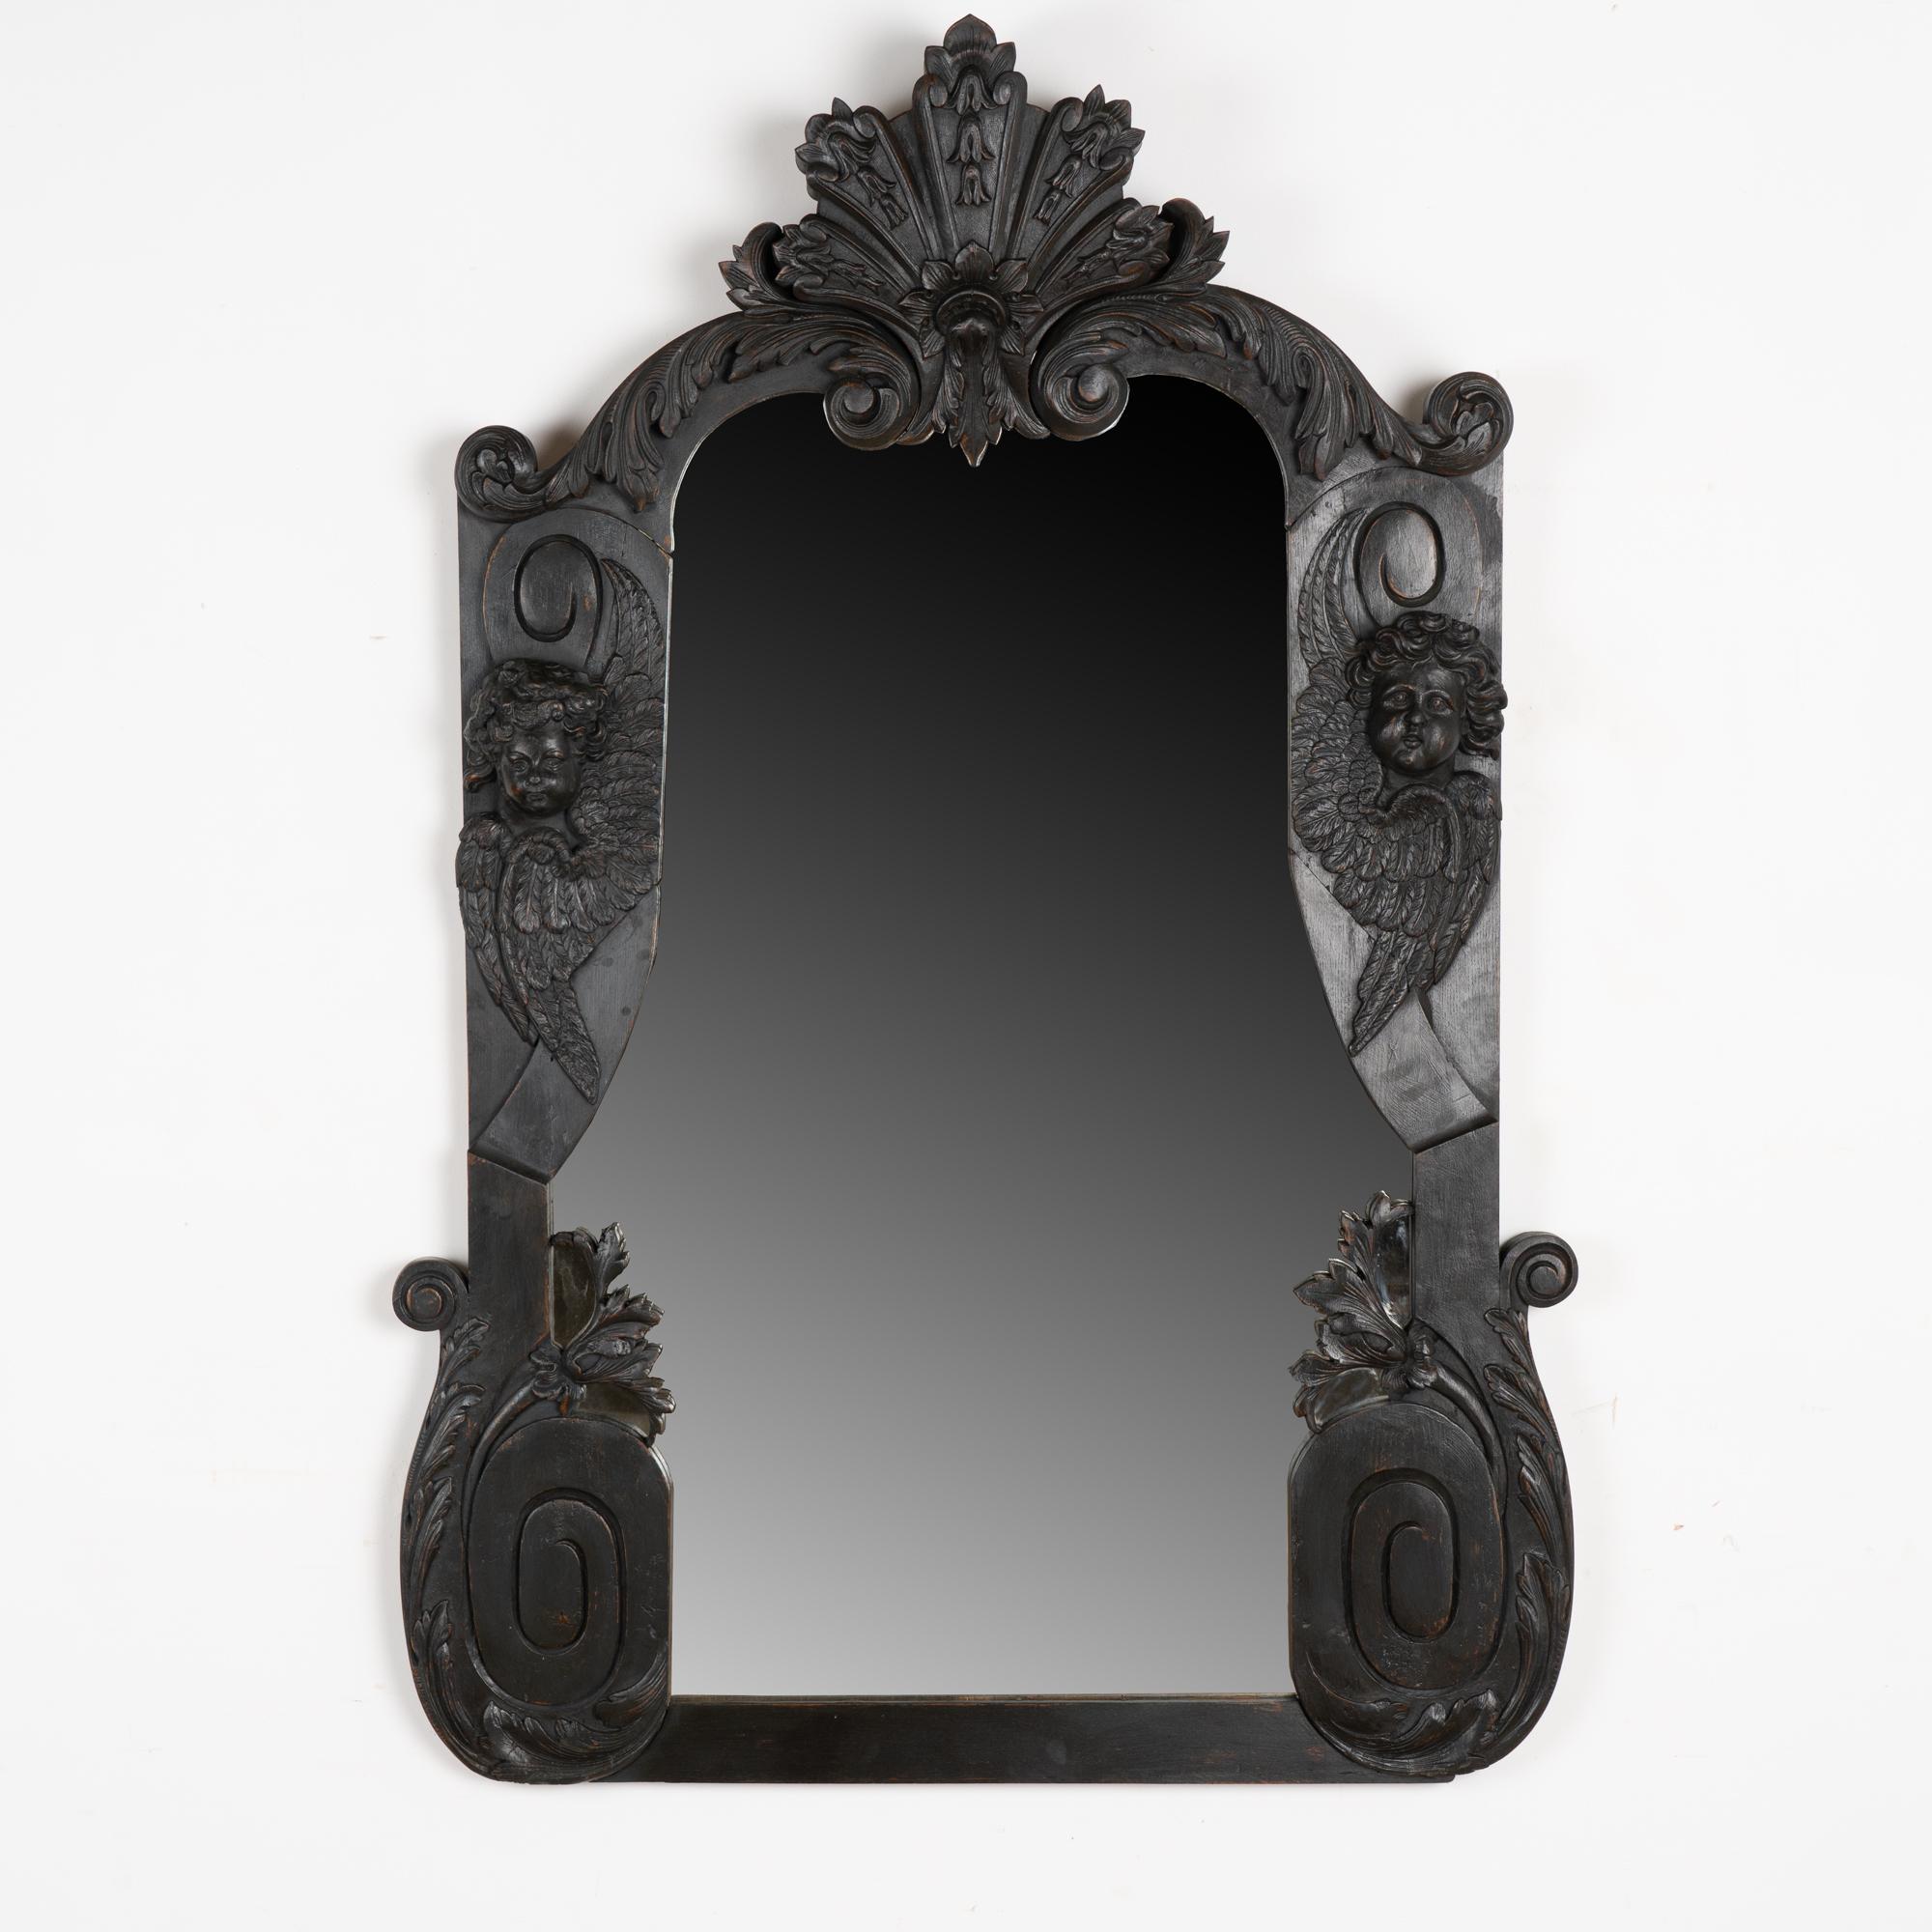 Large and impressive carved oak mirror with cherub/putti faces with wings in addition to other elaborate carved flourishes throughout. 
This mirror is just under 6' tall and has been given a newer custom black painted finish, gently rubbed out to